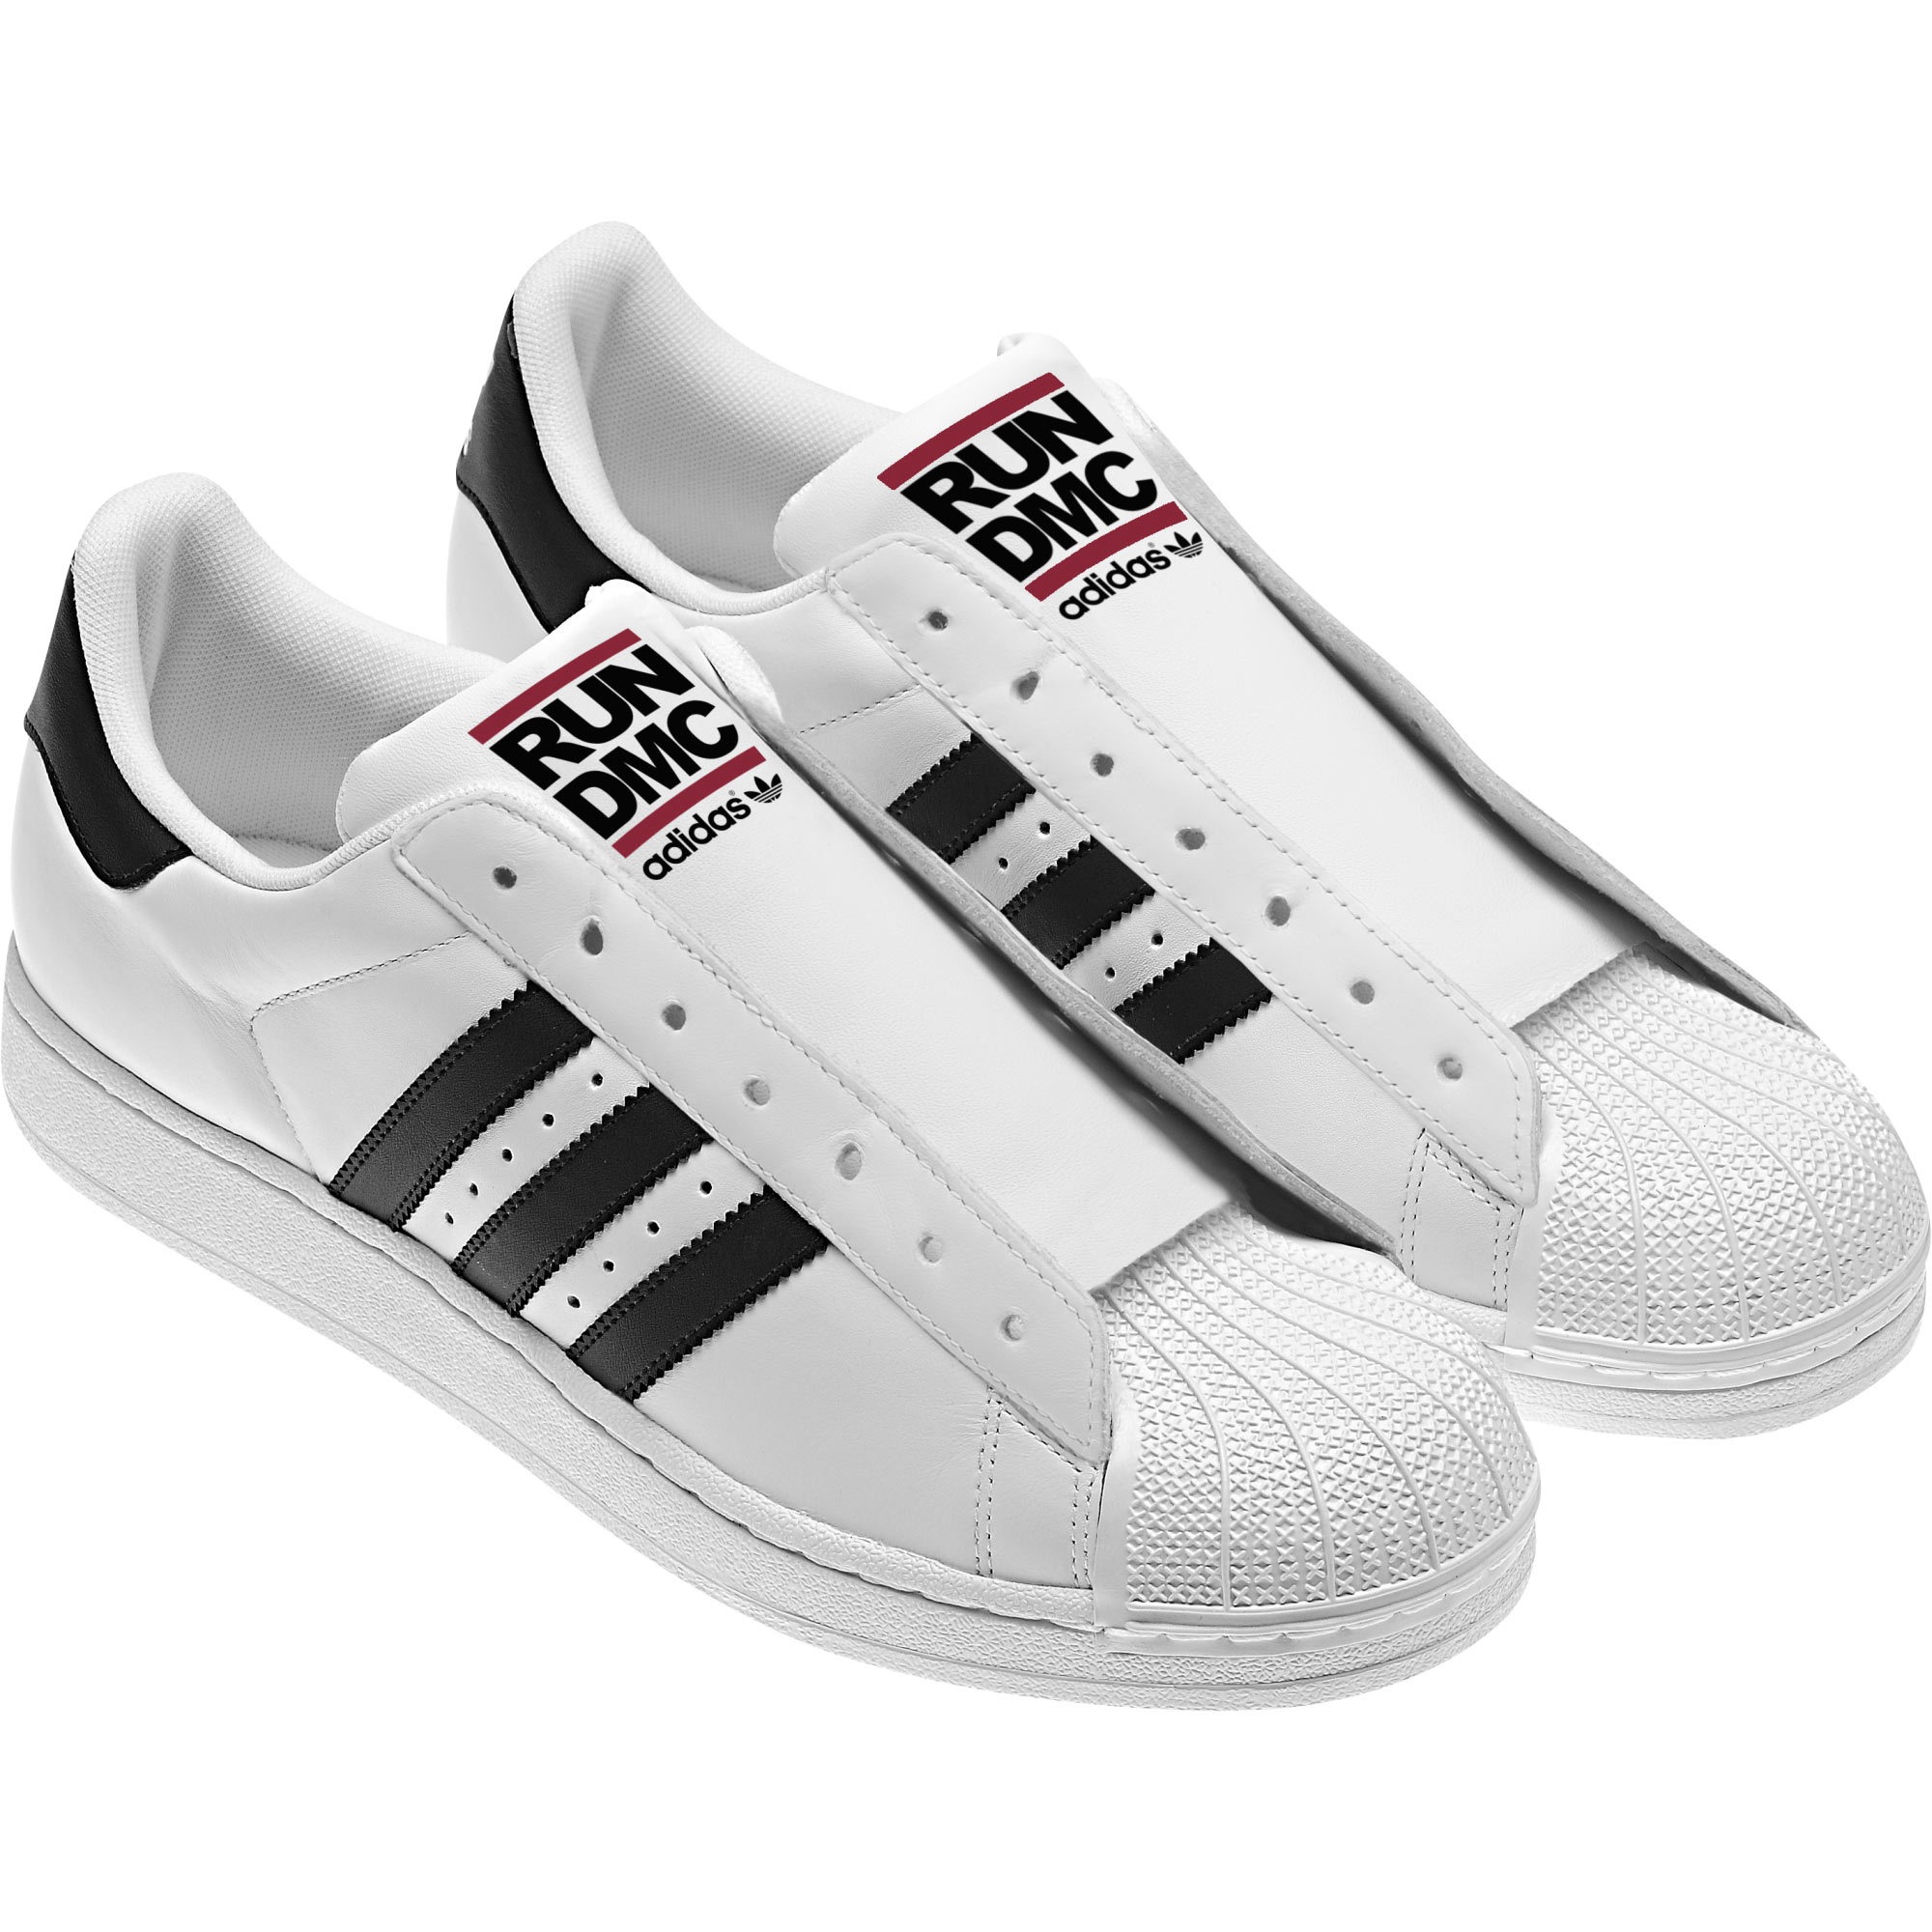 Get your shell-toes, grab your Kangol Hat, & “Walk This Way” – Adidas x ...